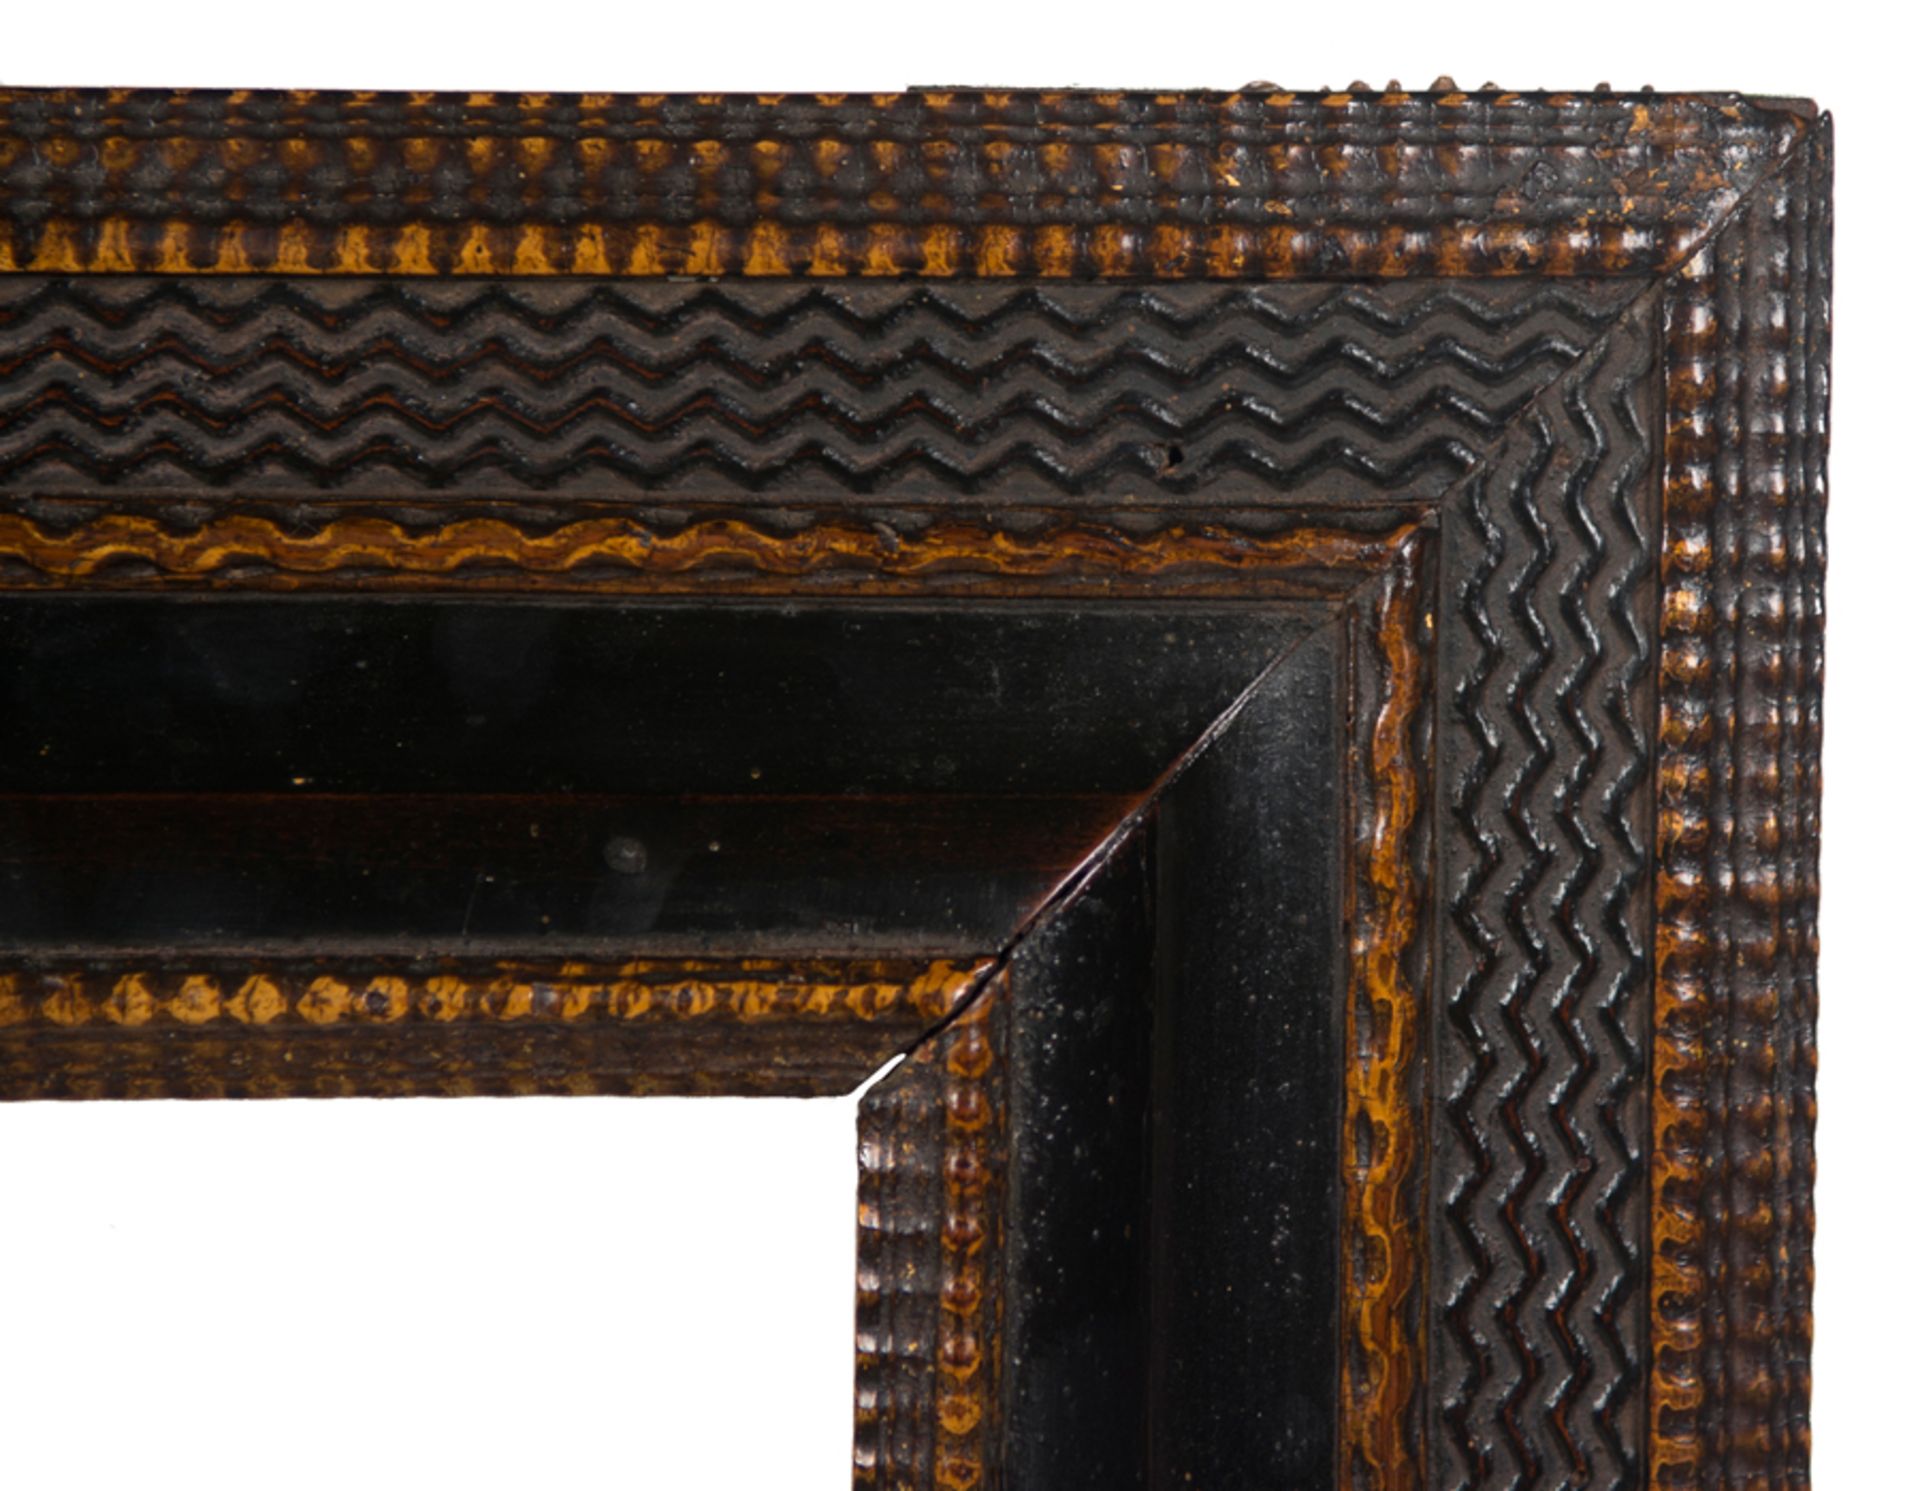 Carved wooden frame. Netherlandish work. 17th - 18th century. - Image 2 of 3